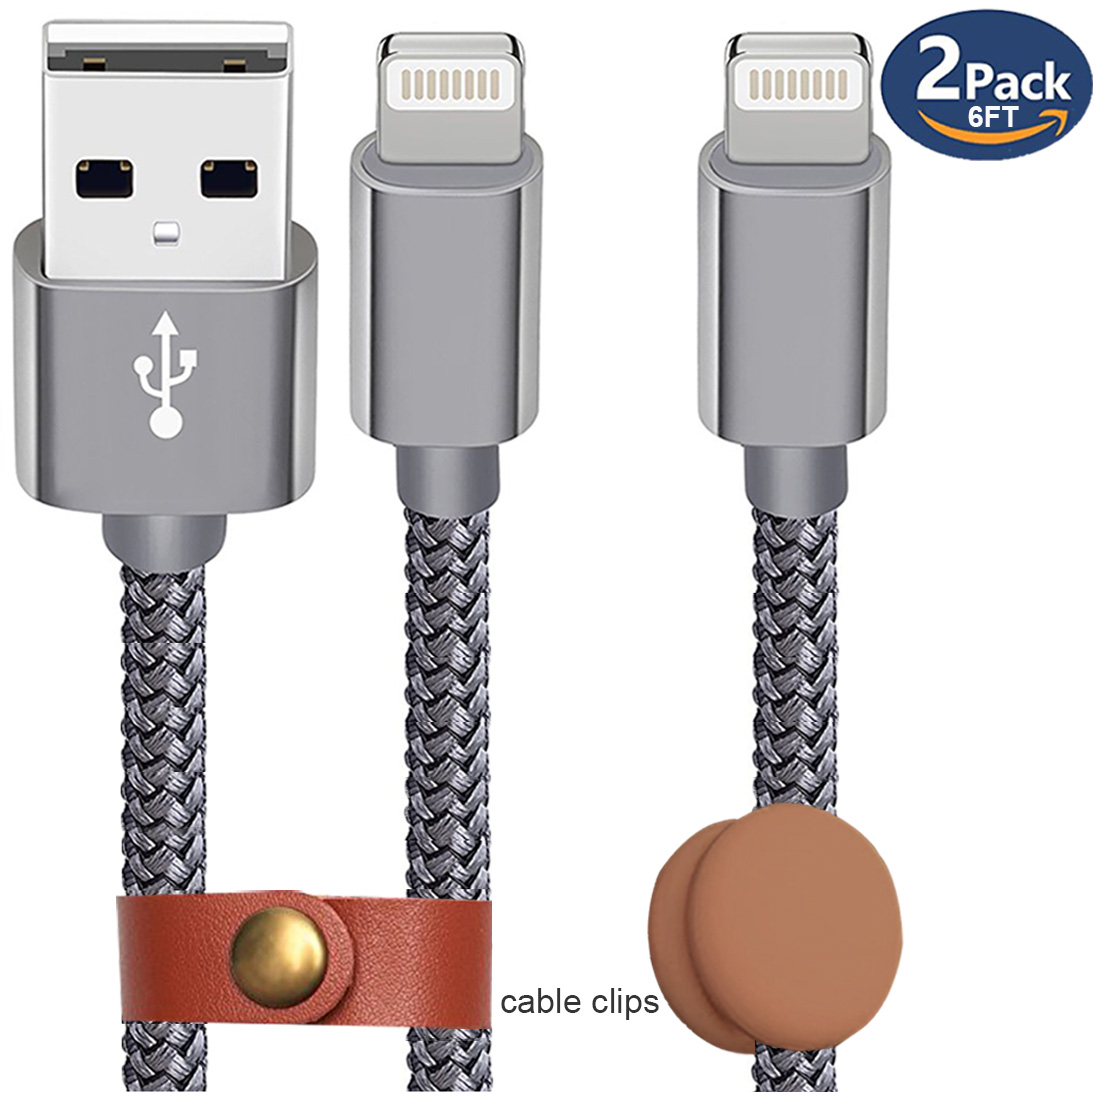 6FT Lightning Cable